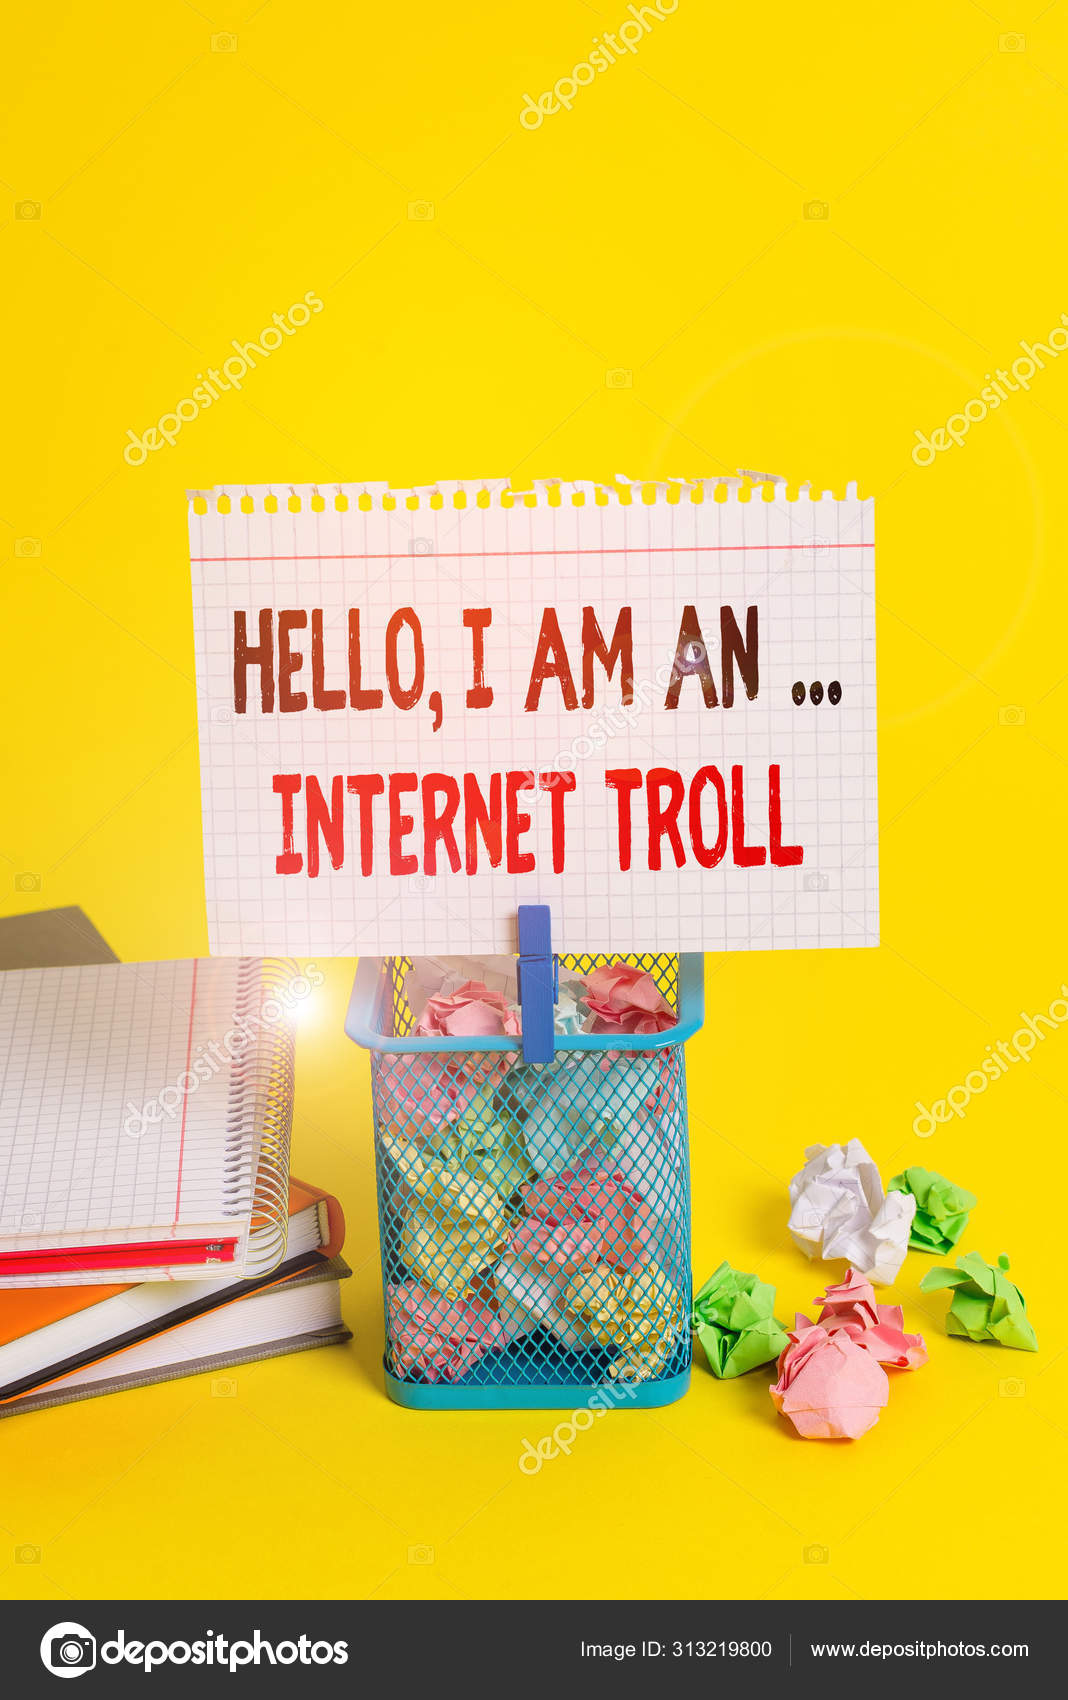 Handwriting Text Writing Hello I am an Internet Troll. Concept Meaning  Social Media Troubles Discussions Arguments Back View Stock Illustration -  Illustration of grunge, identity: 161587590